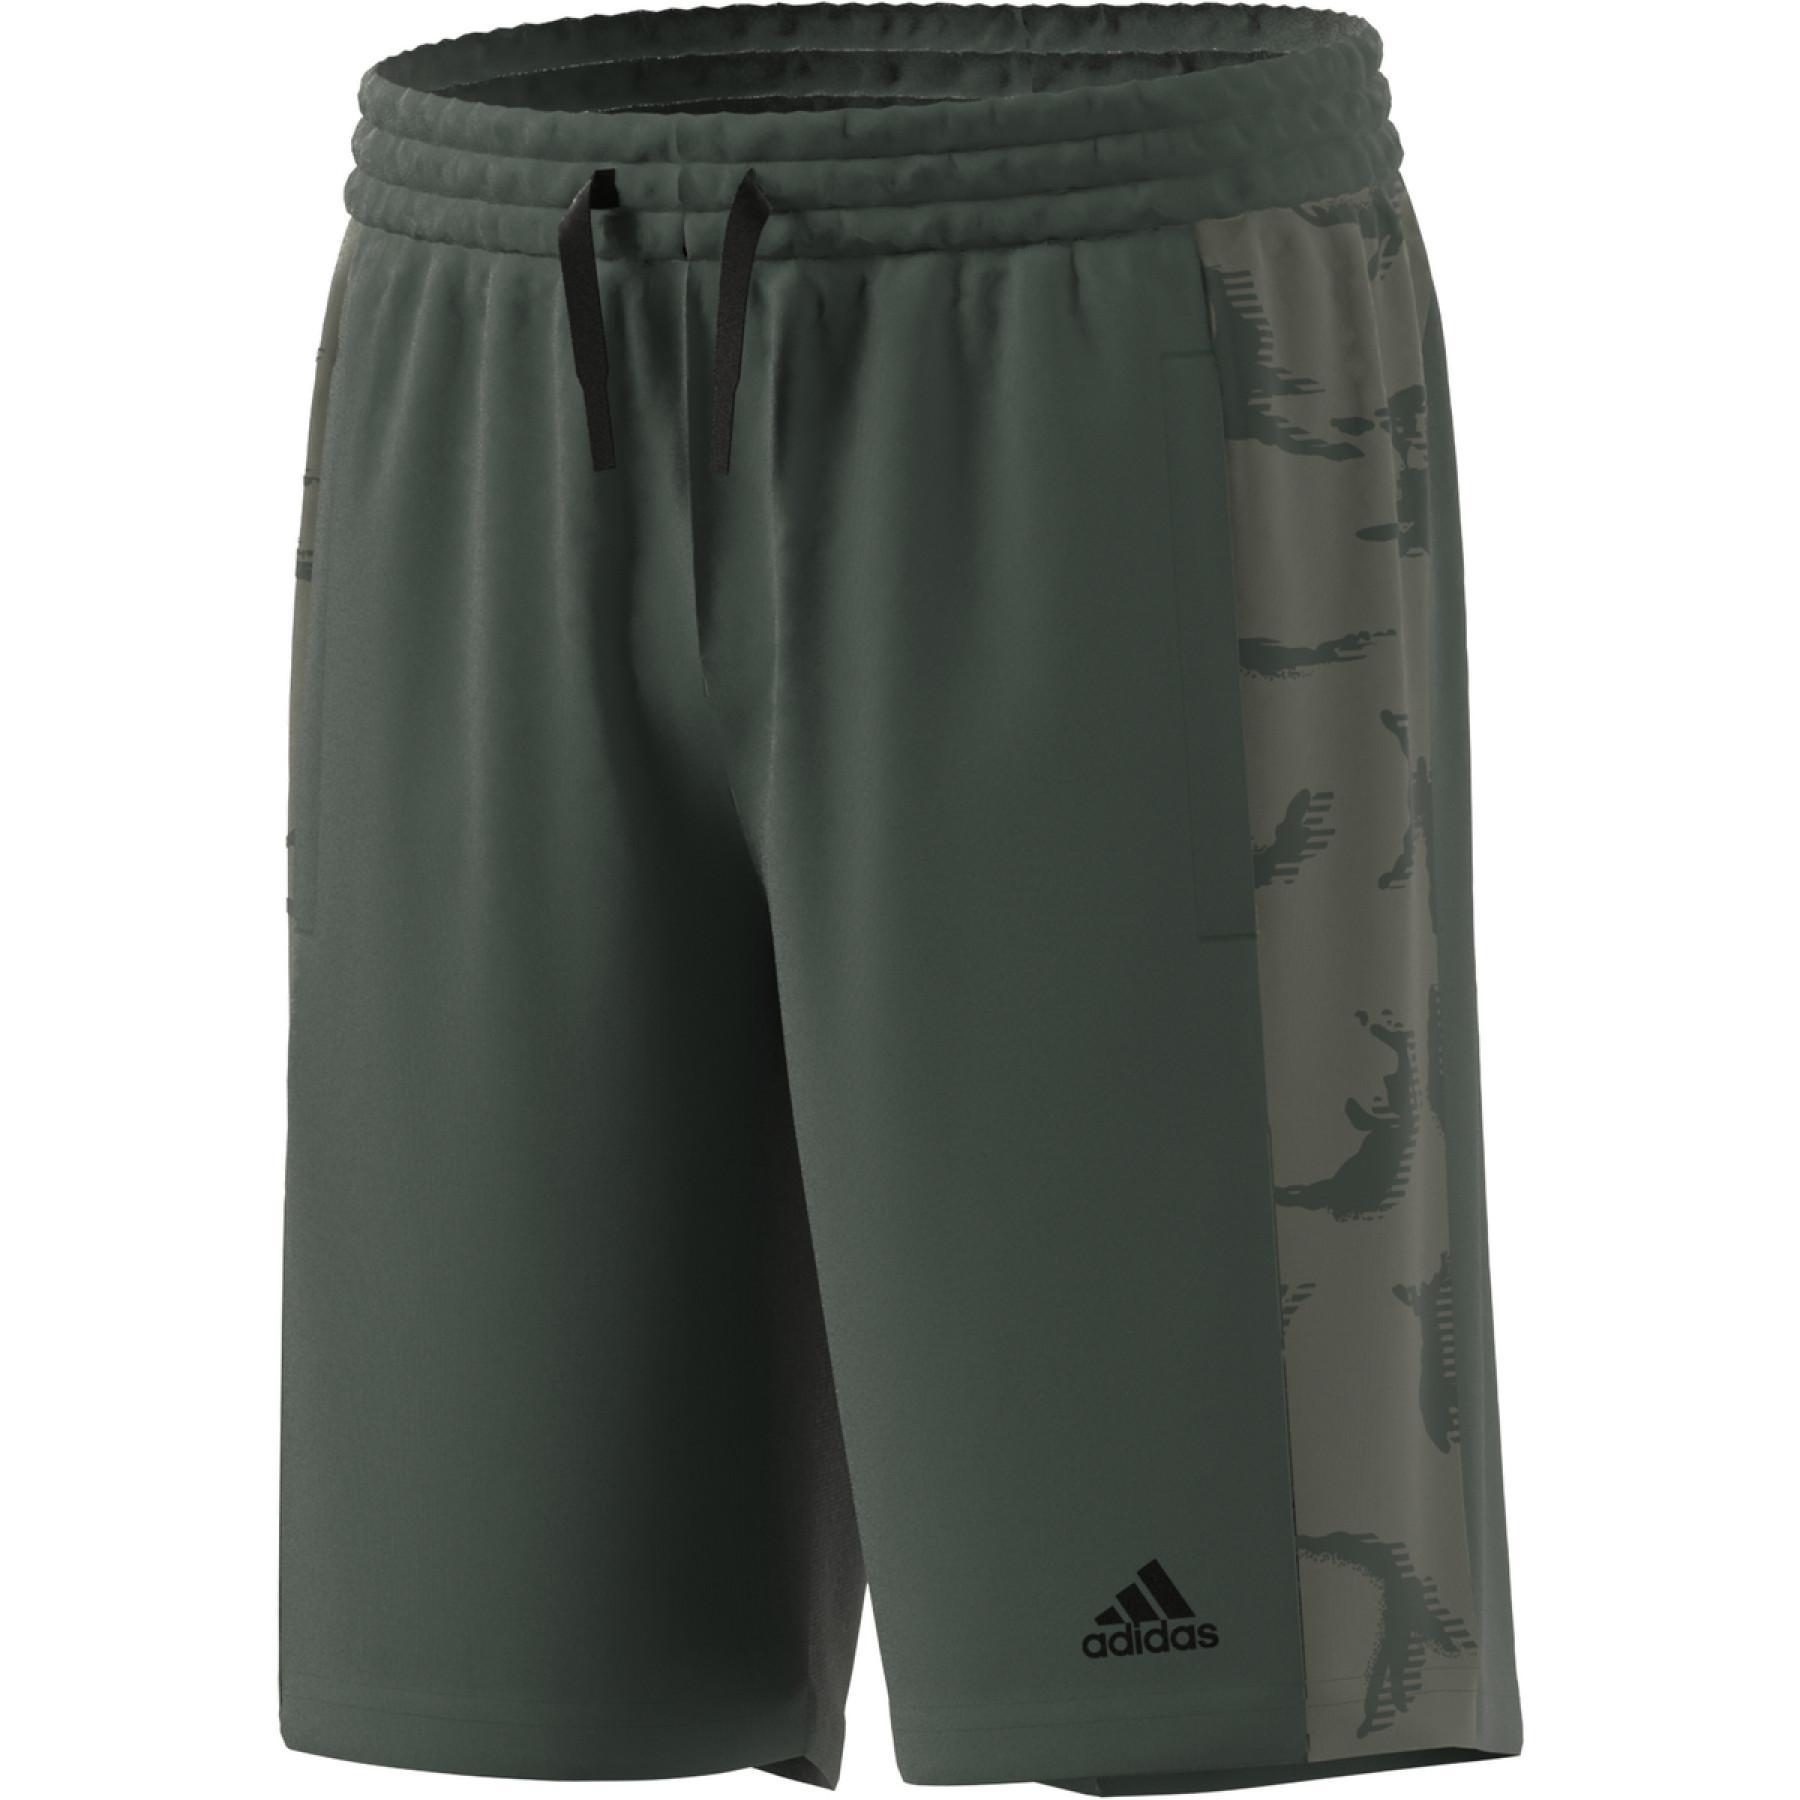 Children's shorts adidas Designed To Move Camouflage